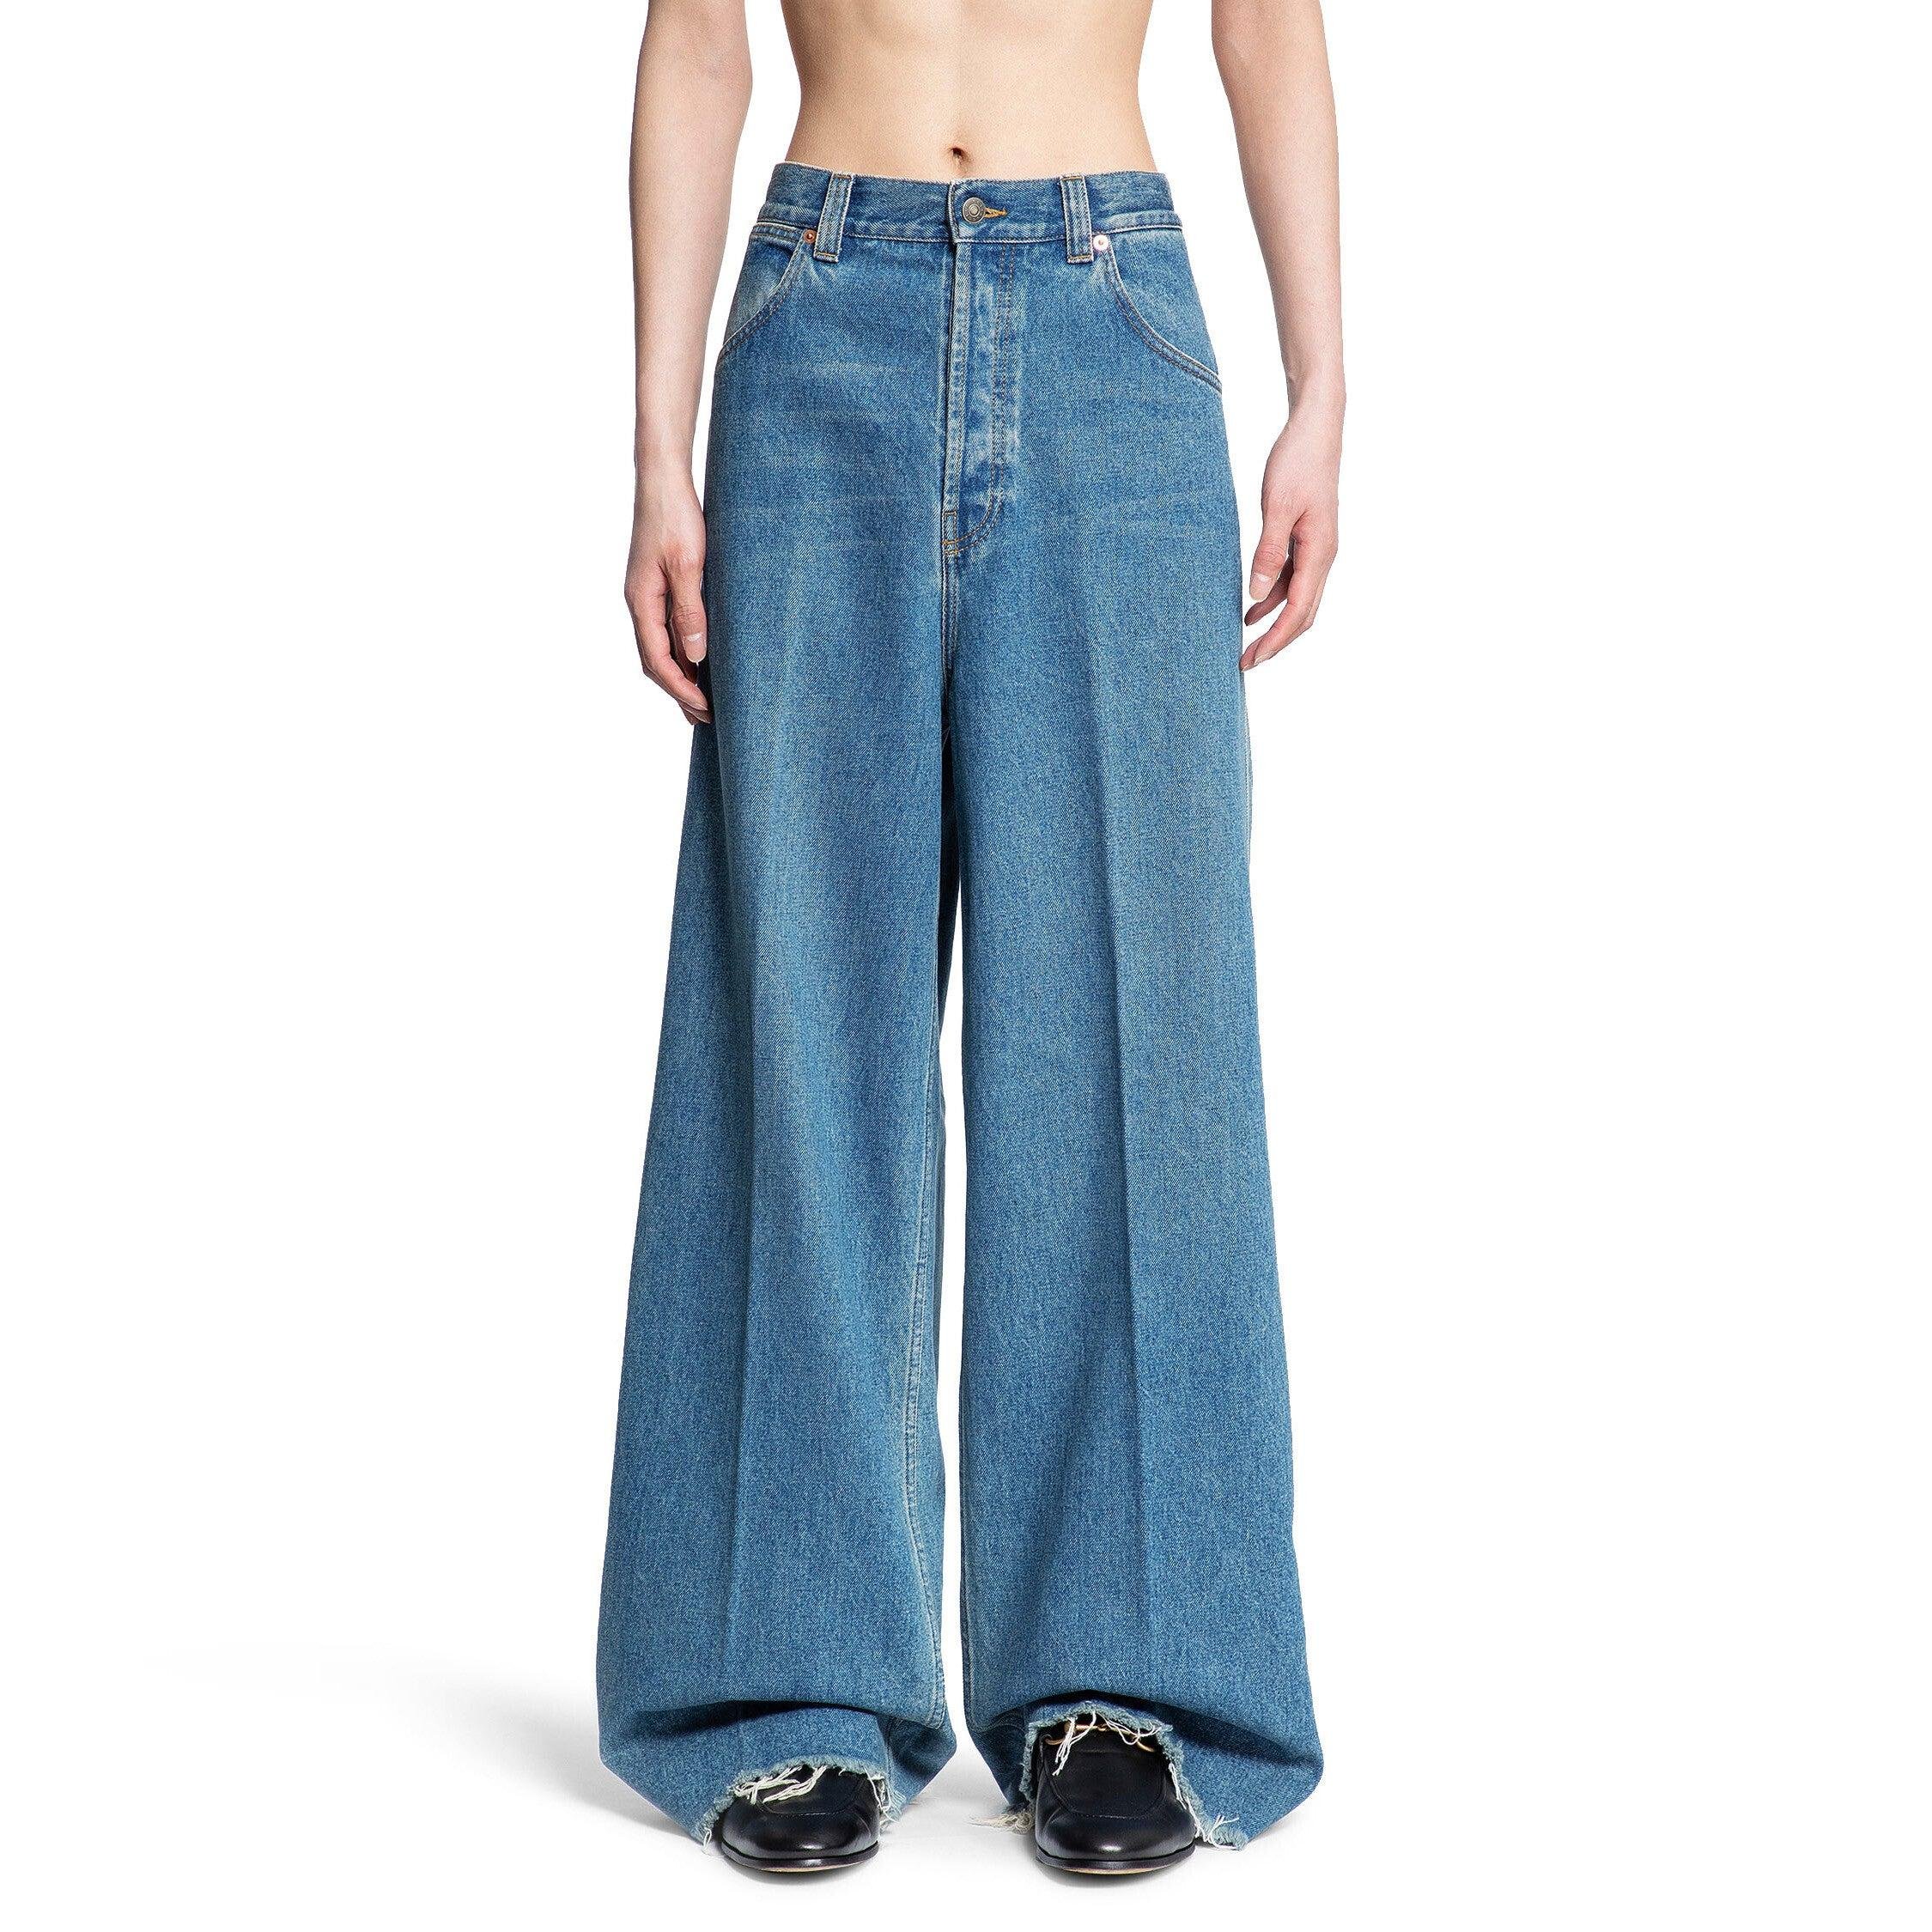 GUCCI MAN BLUE JEANS by GUCCI